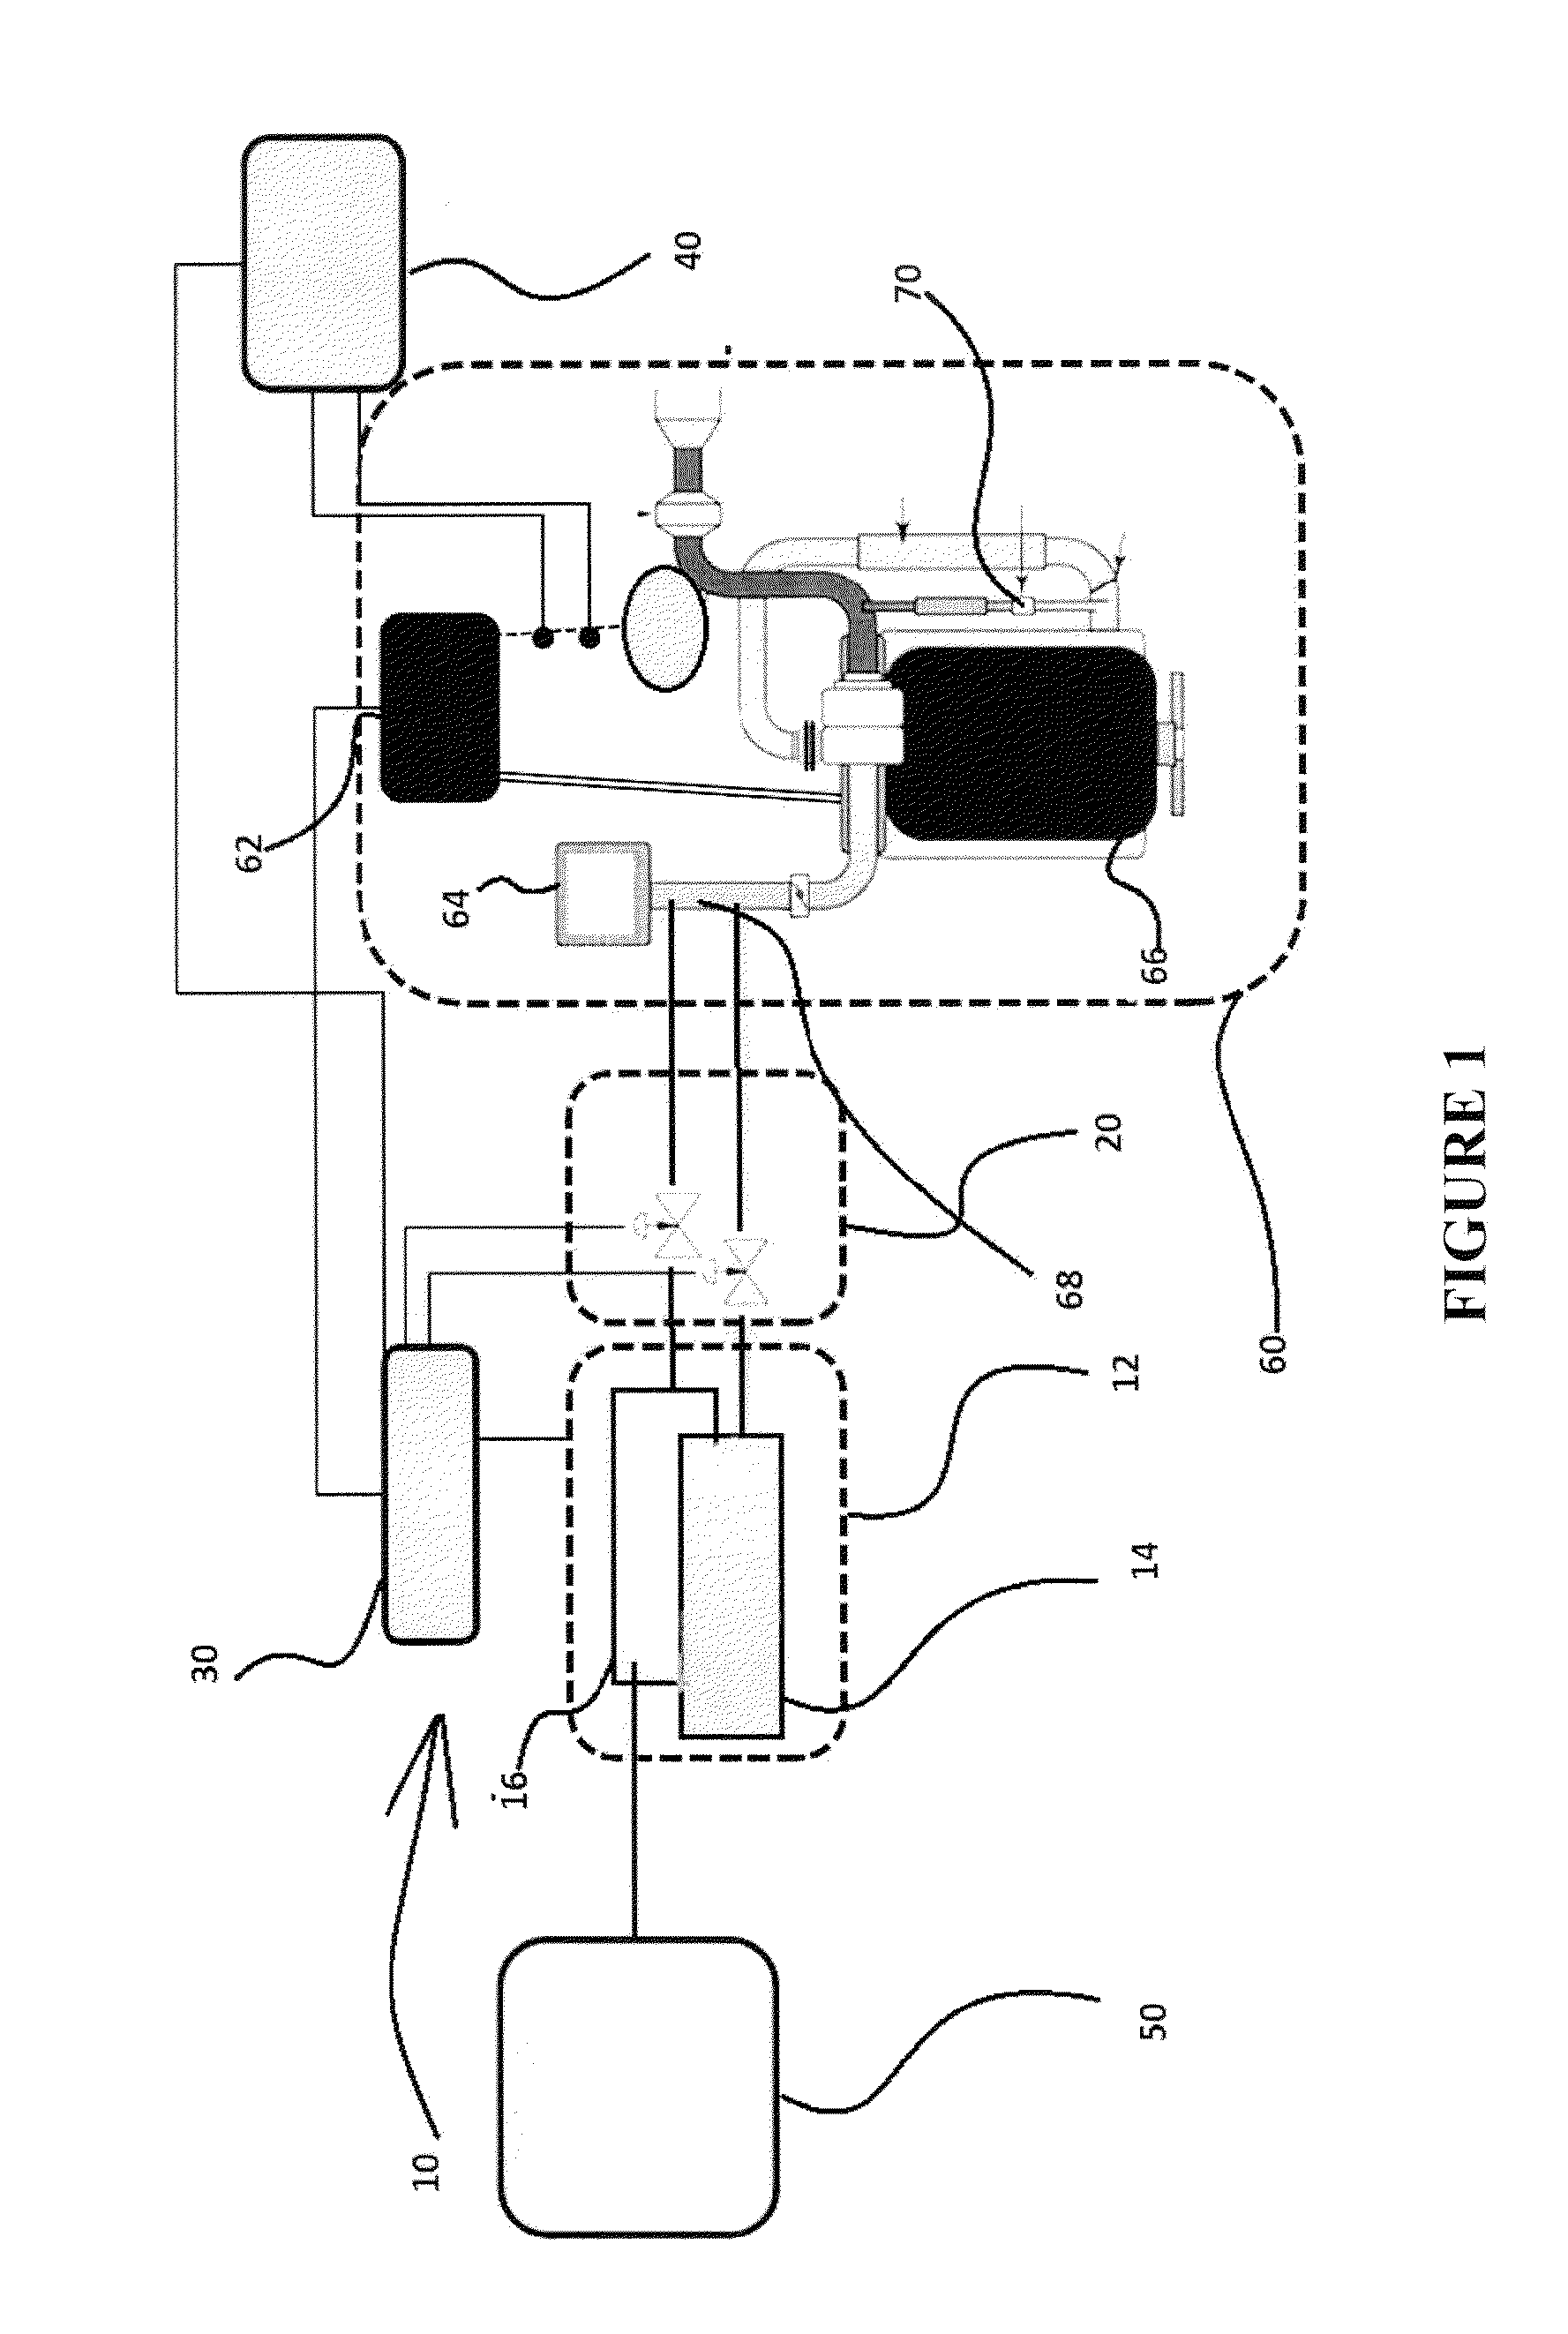 Method and system for improving fuel economy and reducing emissions of internal combustion engines